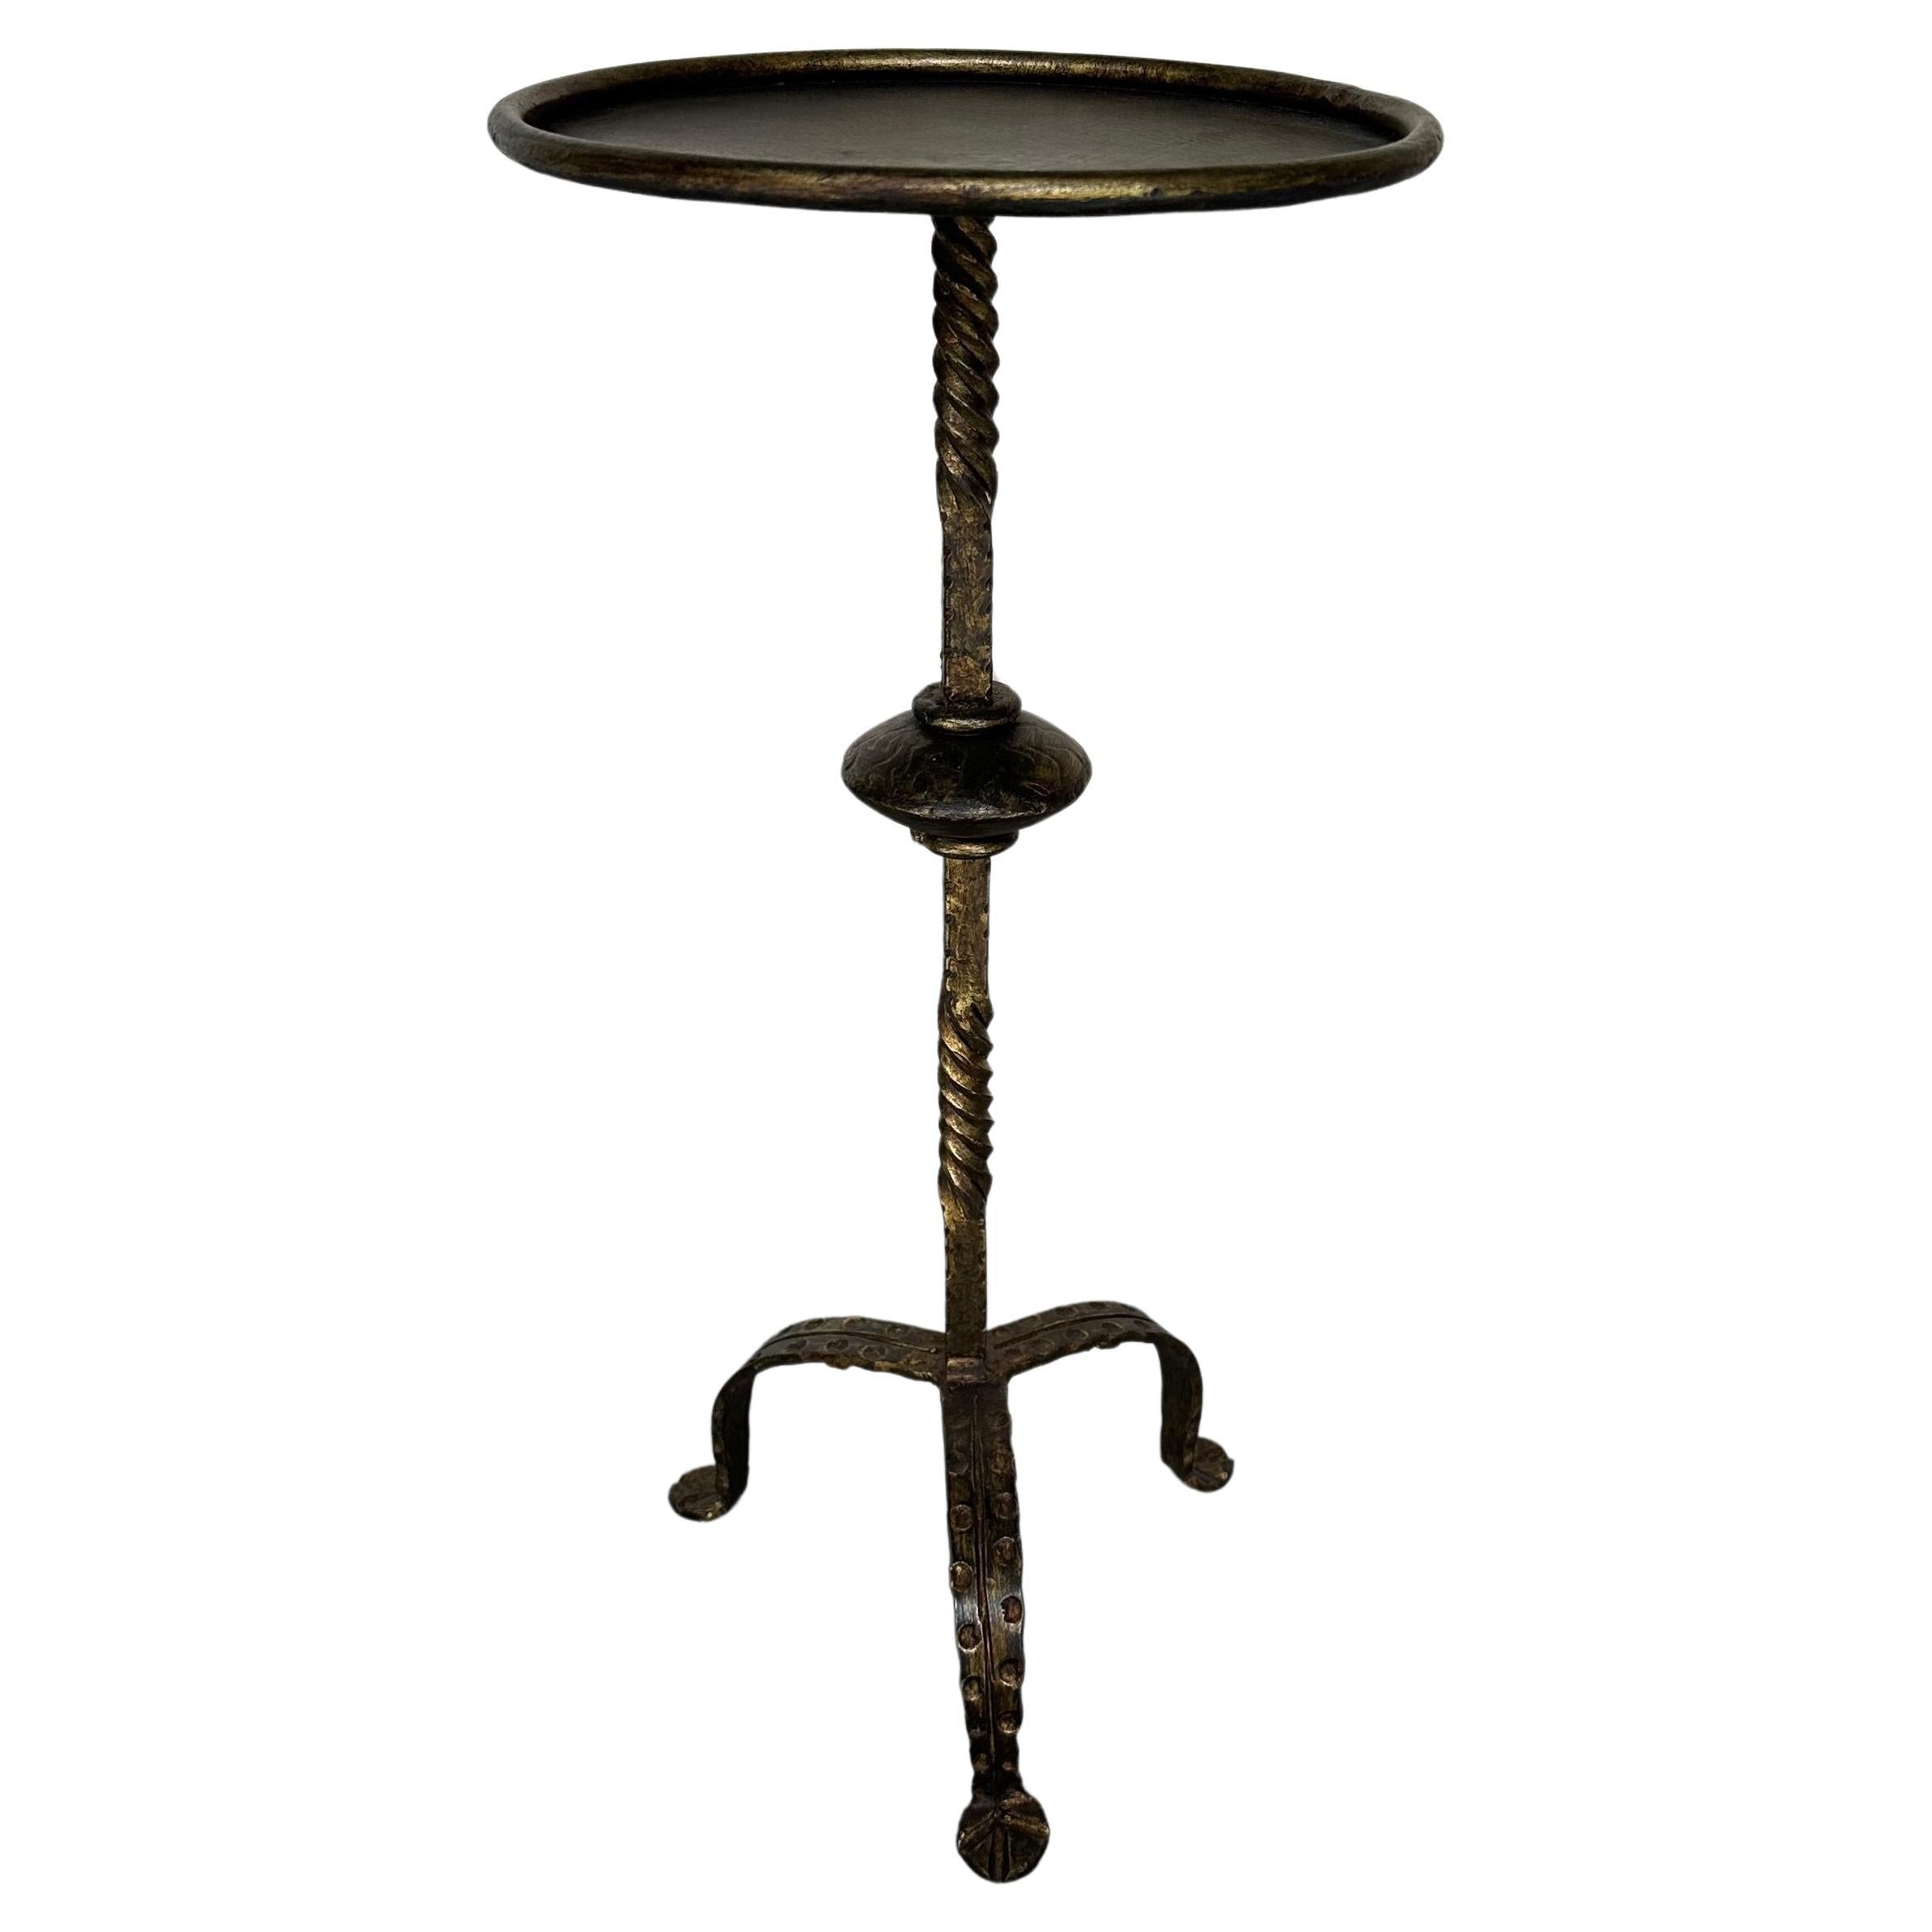 Spanish Gilt Iron Drinks Table with Decorative Stem For Sale